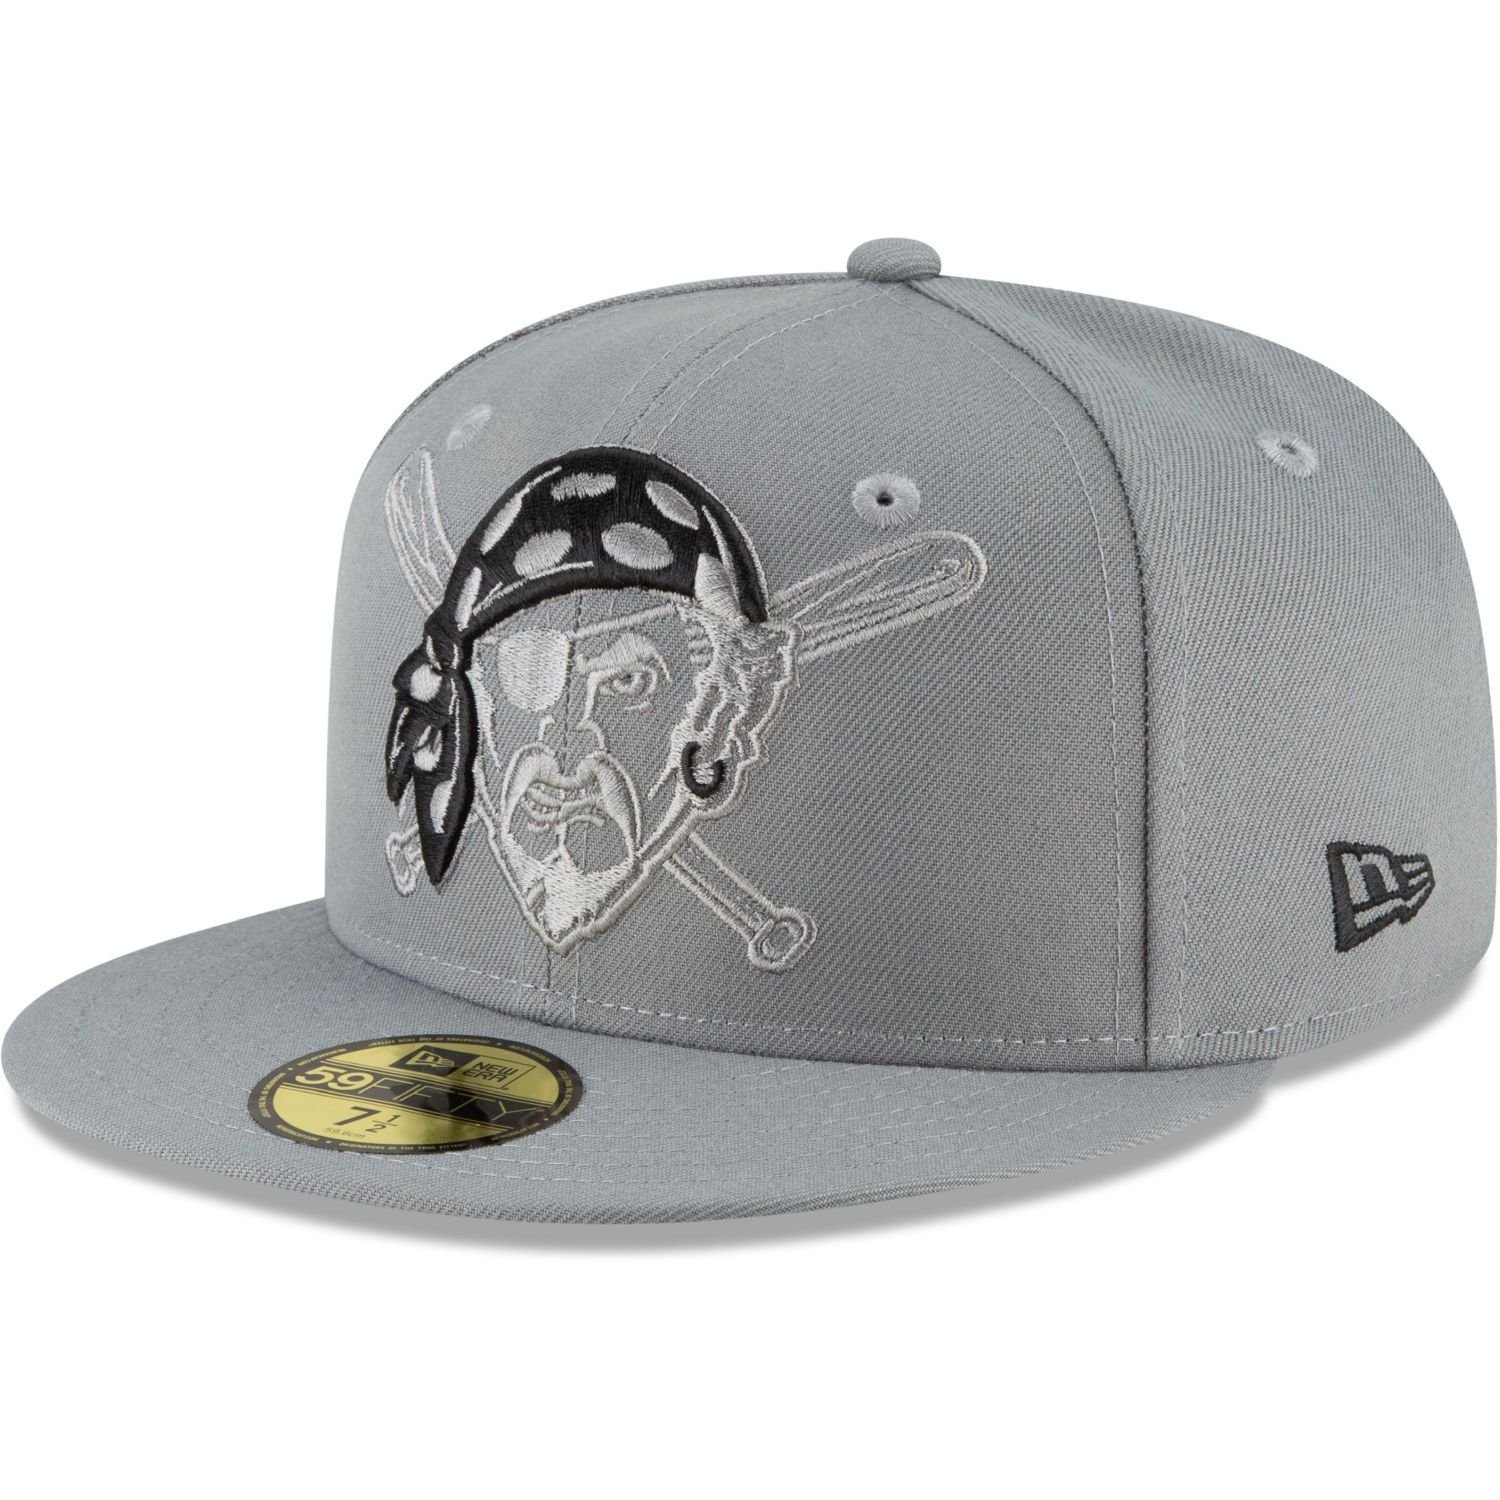 New Era Fitted Cap 59Fifty STORM GREY MLB Cooperstown Team Pittsburgh Pirates